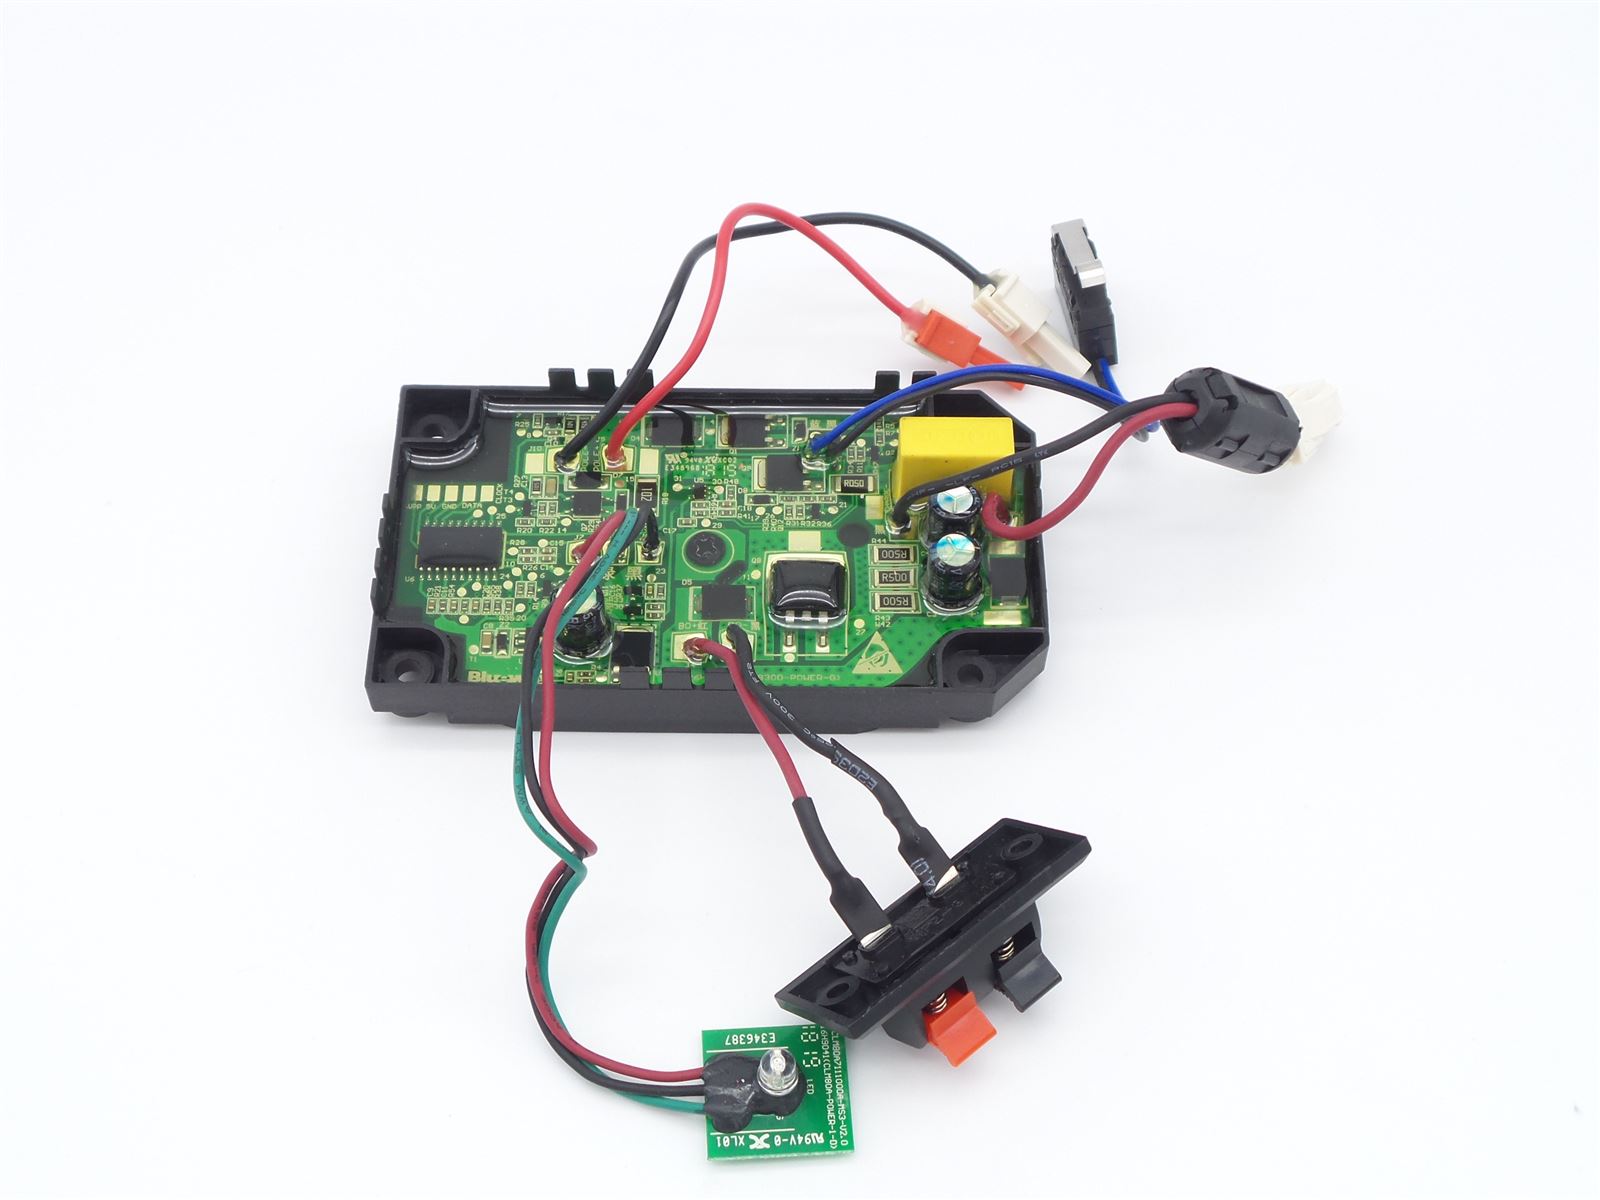 Power Supply Board Assembly - 50034483